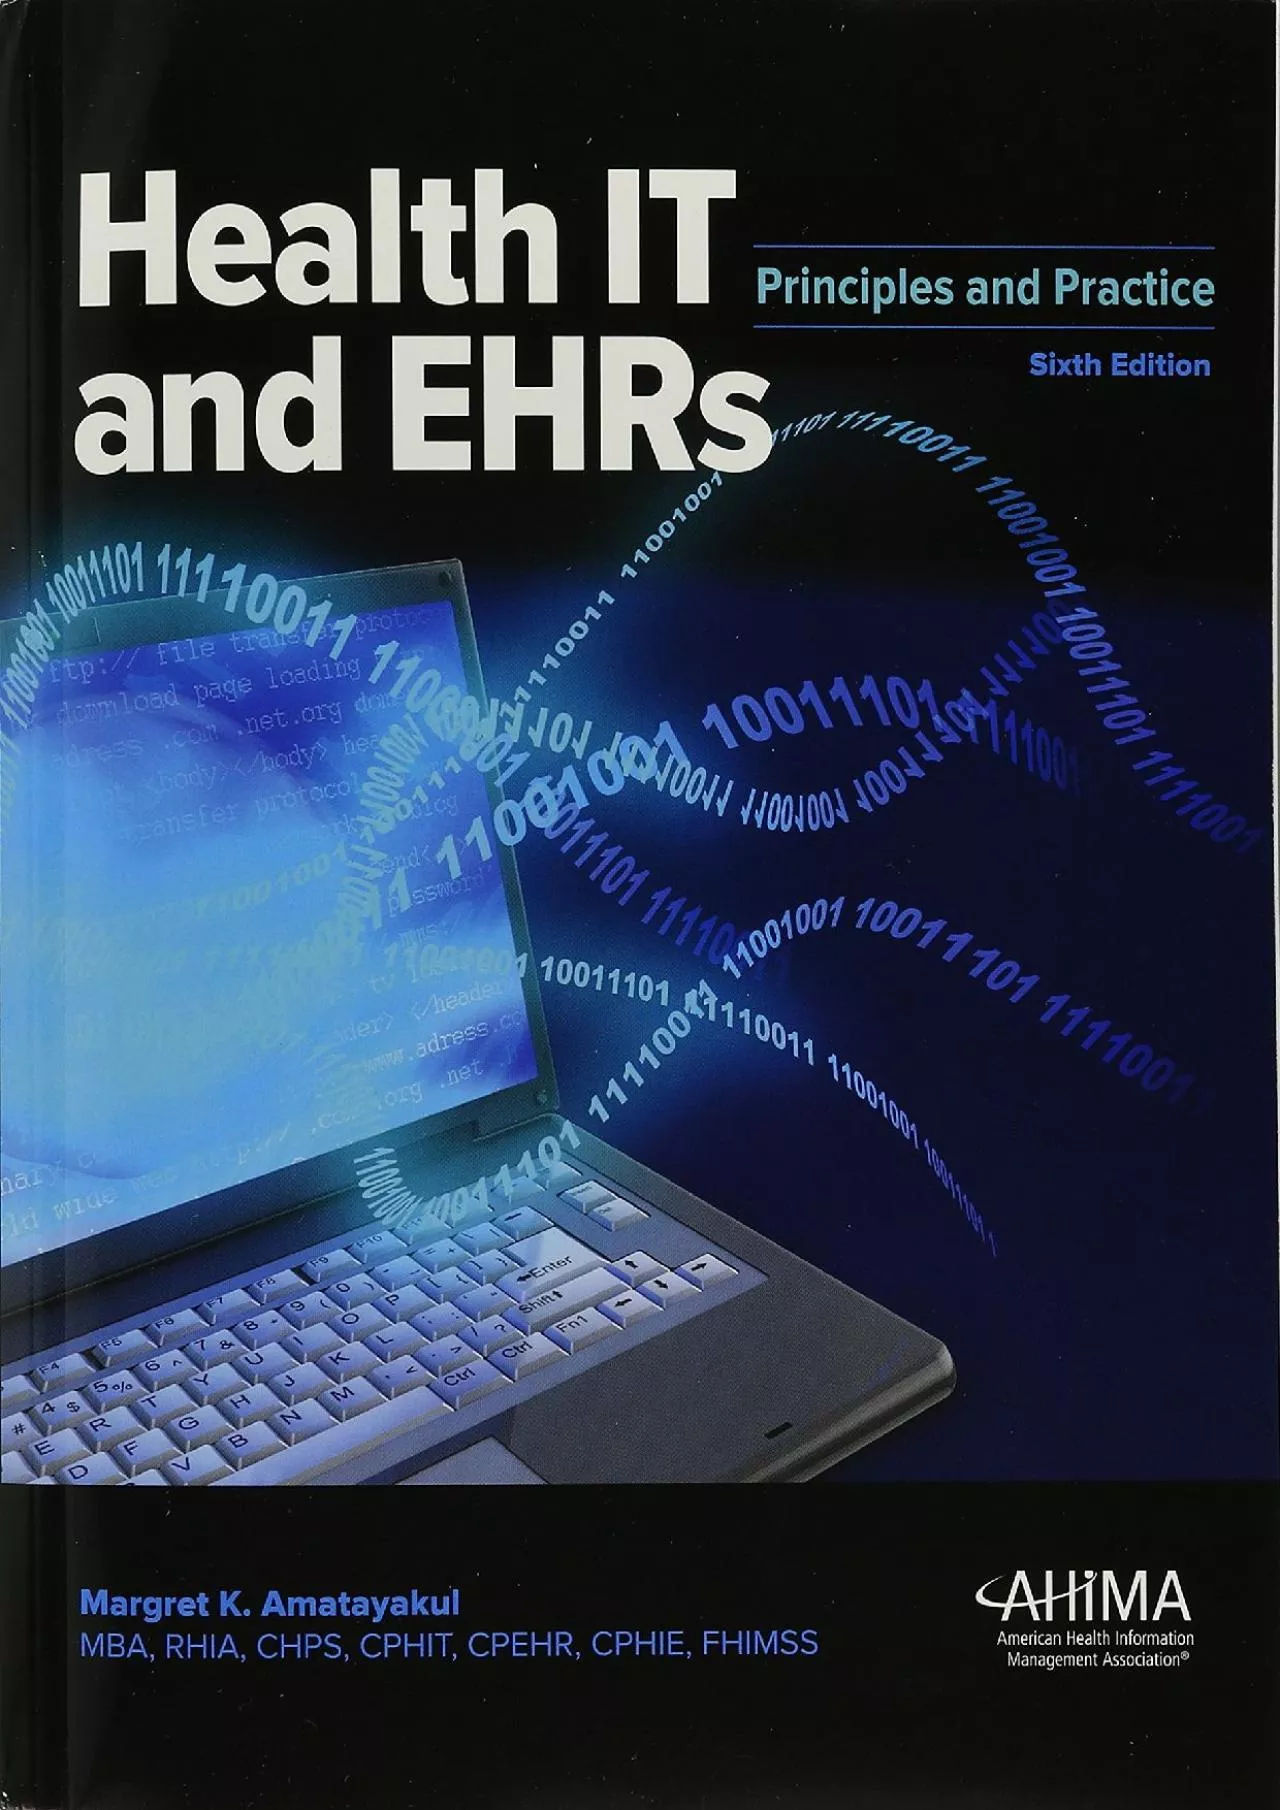 (EBOOK)-Health IT and EHRs: Principles and Practice